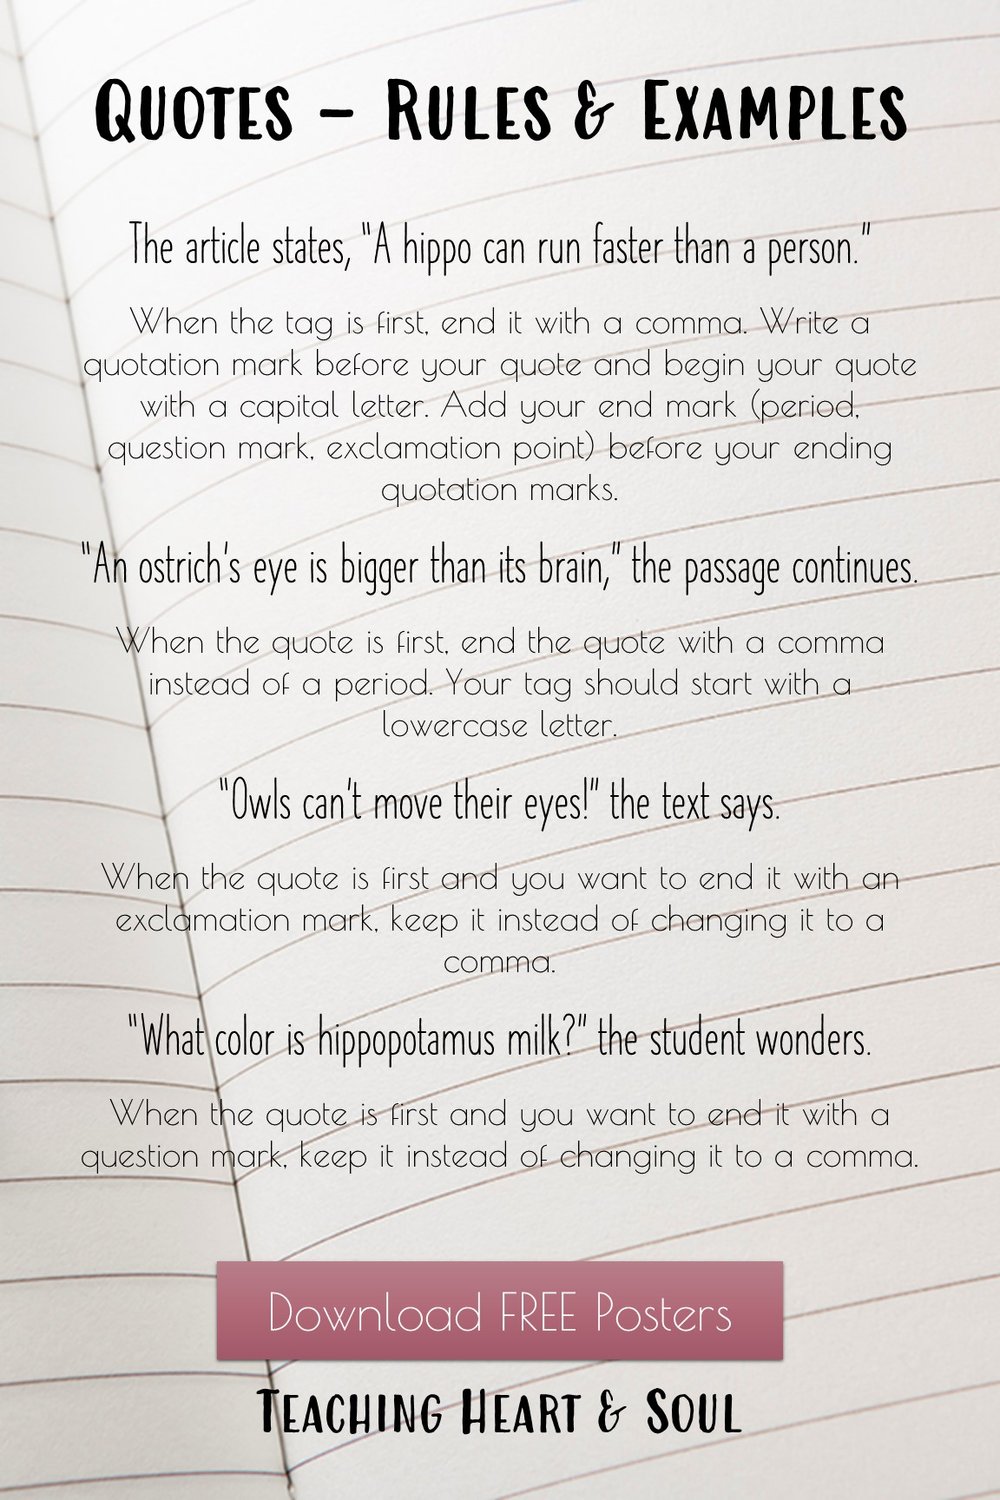 Teaching-Students-the-RACE-Writing-Strategy-quote-rules-and-examples-poster.JPG